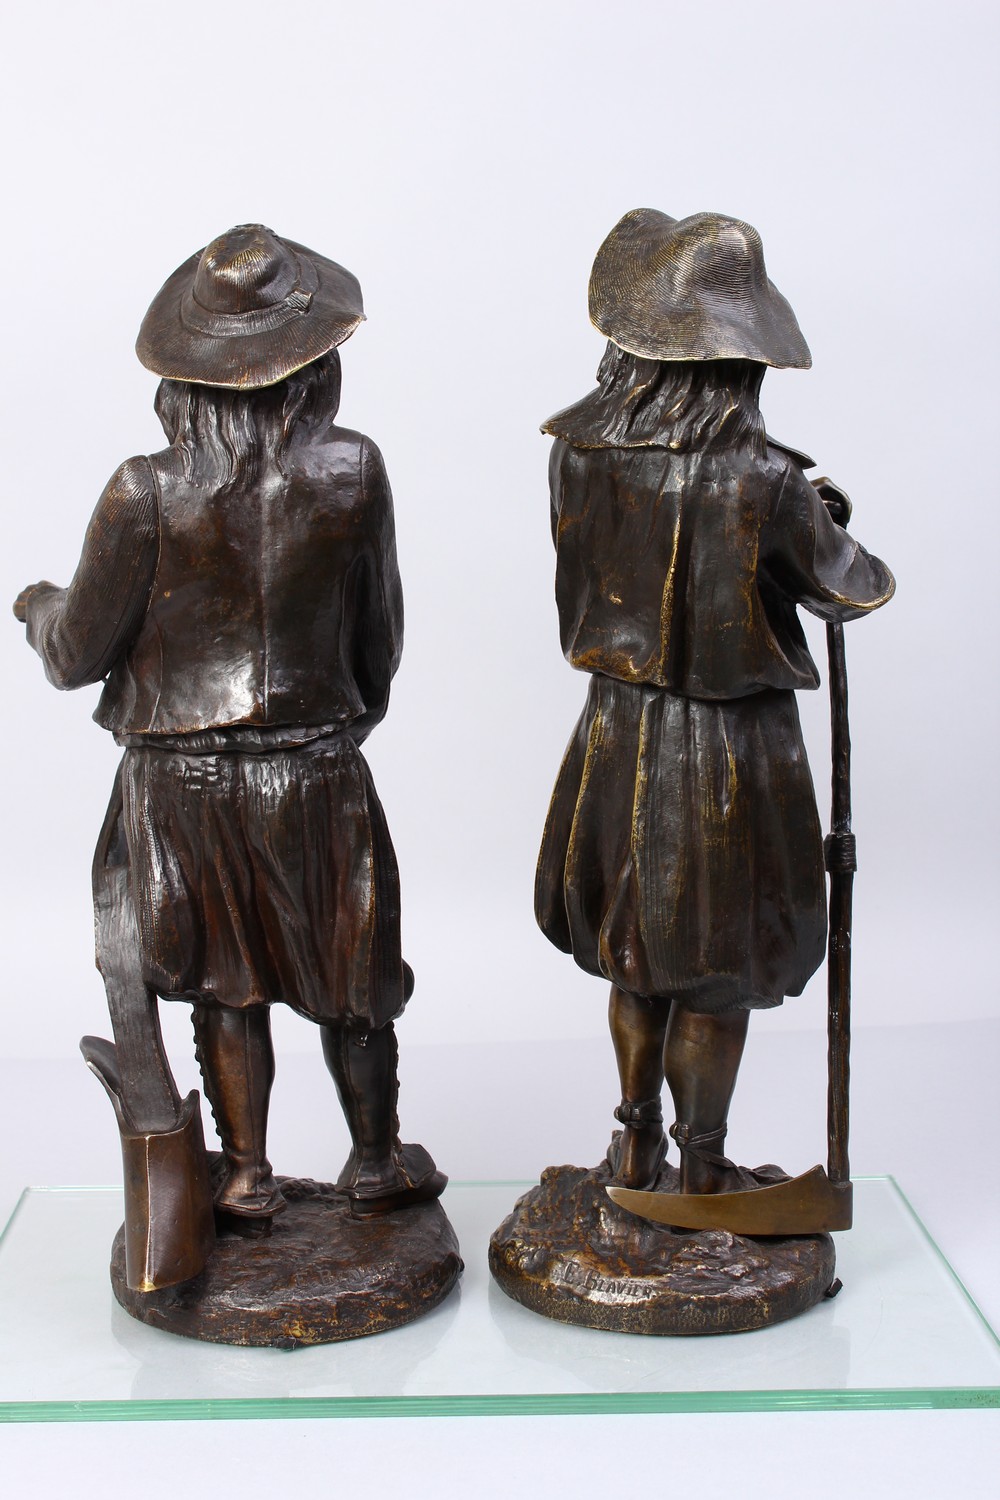 EMILE VICTOR BLAVIER (19TH CENTURY) FRENCH A RARE PAIR OF BRONZE FIELD WORKERS, one carrying a - Image 9 of 14